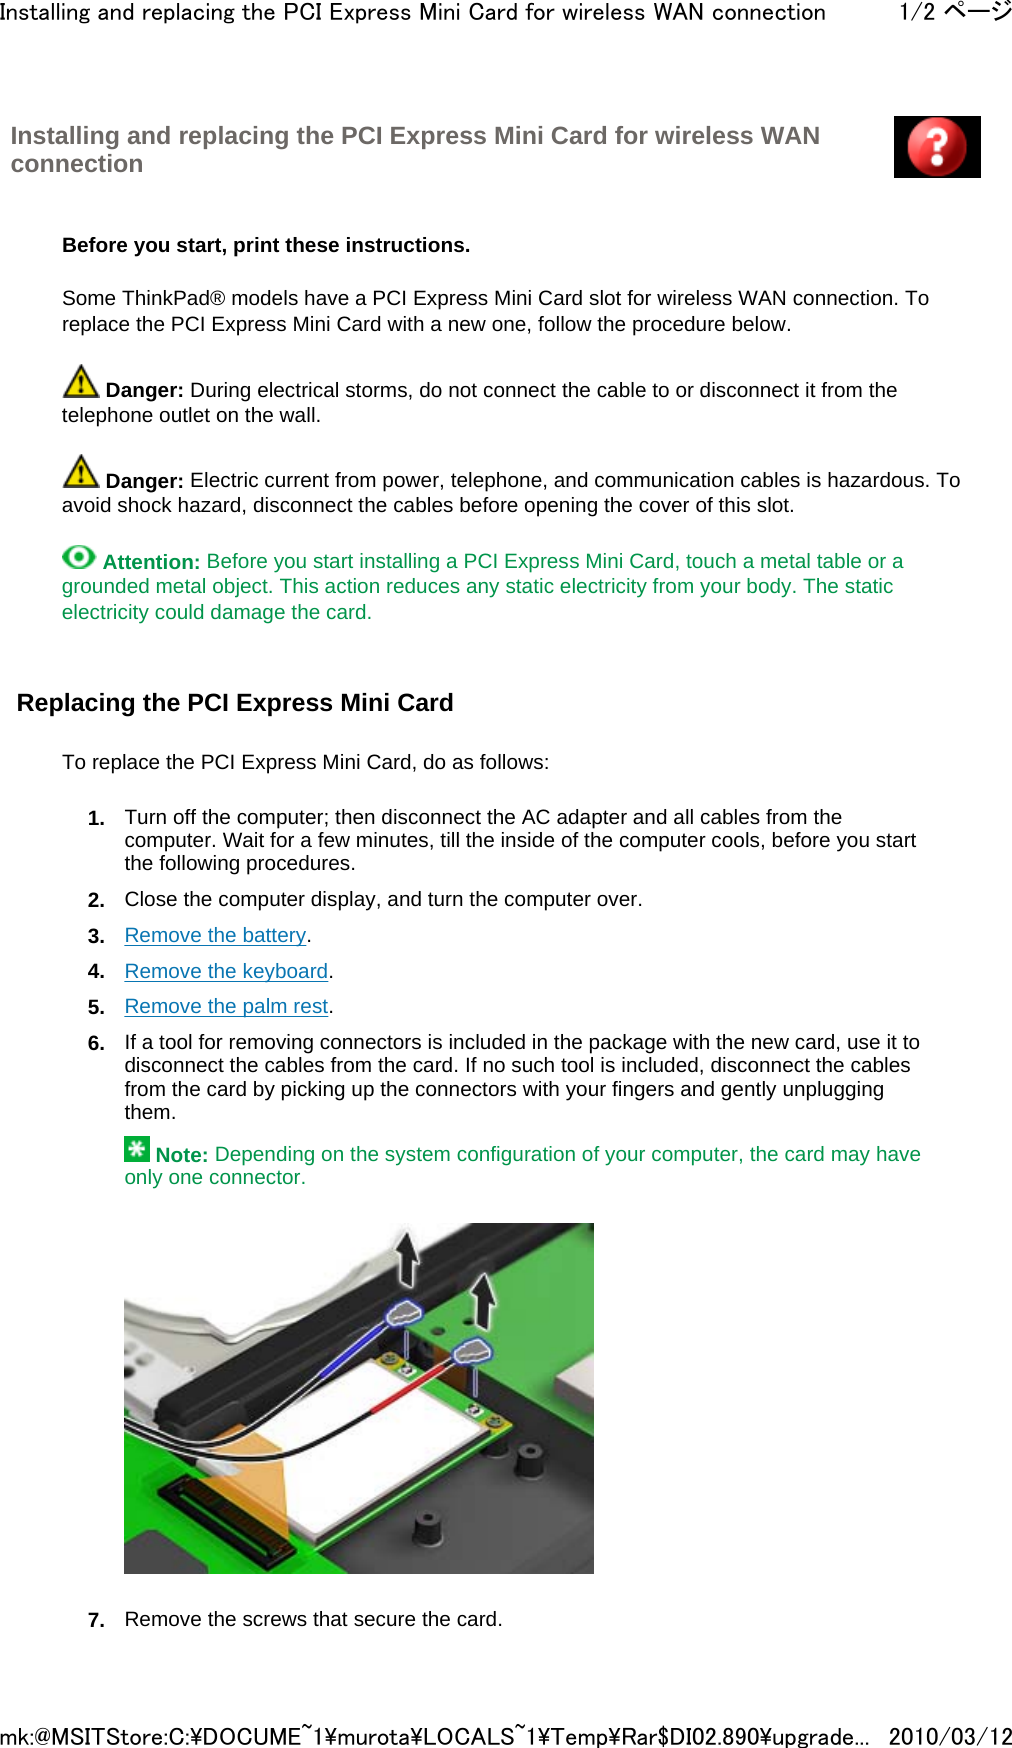 Installing and replacing the PCI Express Mini Card for wireless WAN connection         Before you start, print these instructions.   Some ThinkPad® models have a PCI Express Mini Card slot for wireless WAN connection. To replace the PCI Express Mini Card with a new one, follow the procedure below.   Danger: During electrical storms, do not connect the cable to or disconnect it from the telephone outlet on the wall.   Danger: Electric current from power, telephone, and communication cables is hazardous. To avoid shock hazard, disconnect the cables before opening the cover of this slot.   Attention: Before you start installing a PCI Express Mini Card, touch a metal table or a grounded metal object. This action reduces any static electricity from your body. The static electricity could damage the card.   Replacing the PCI Express Mini Card   To replace the PCI Express Mini Card, do as follows: 1. Turn off the computer; then disconnect the AC adapter and all cables from the computer. Wait for a few minutes, till the inside of the computer cools, before you start the following procedures. 2. Close the computer display, and turn the computer over. 3. Remove the battery. 4. Remove the keyboard. 5. Remove the palm rest. 6. If a tool for removing connectors is included in the package with the new card, use it to disconnect the cables from the card. If no such tool is included, disconnect the cables from the card by picking up the connectors with your fingers and gently unplugging them.  Note: Depending on the system configuration of your computer, the card may have only one connector.      7. Remove the screws that secure the card.1/2 ページInstalling and replacing the PCI Express Mini Card for wireless WAN connection2010/03/12mk:@MSITStore:C:\DOCUME~1\murota\LOCALS~1\Temp\Rar$DI02.890\upgrade...